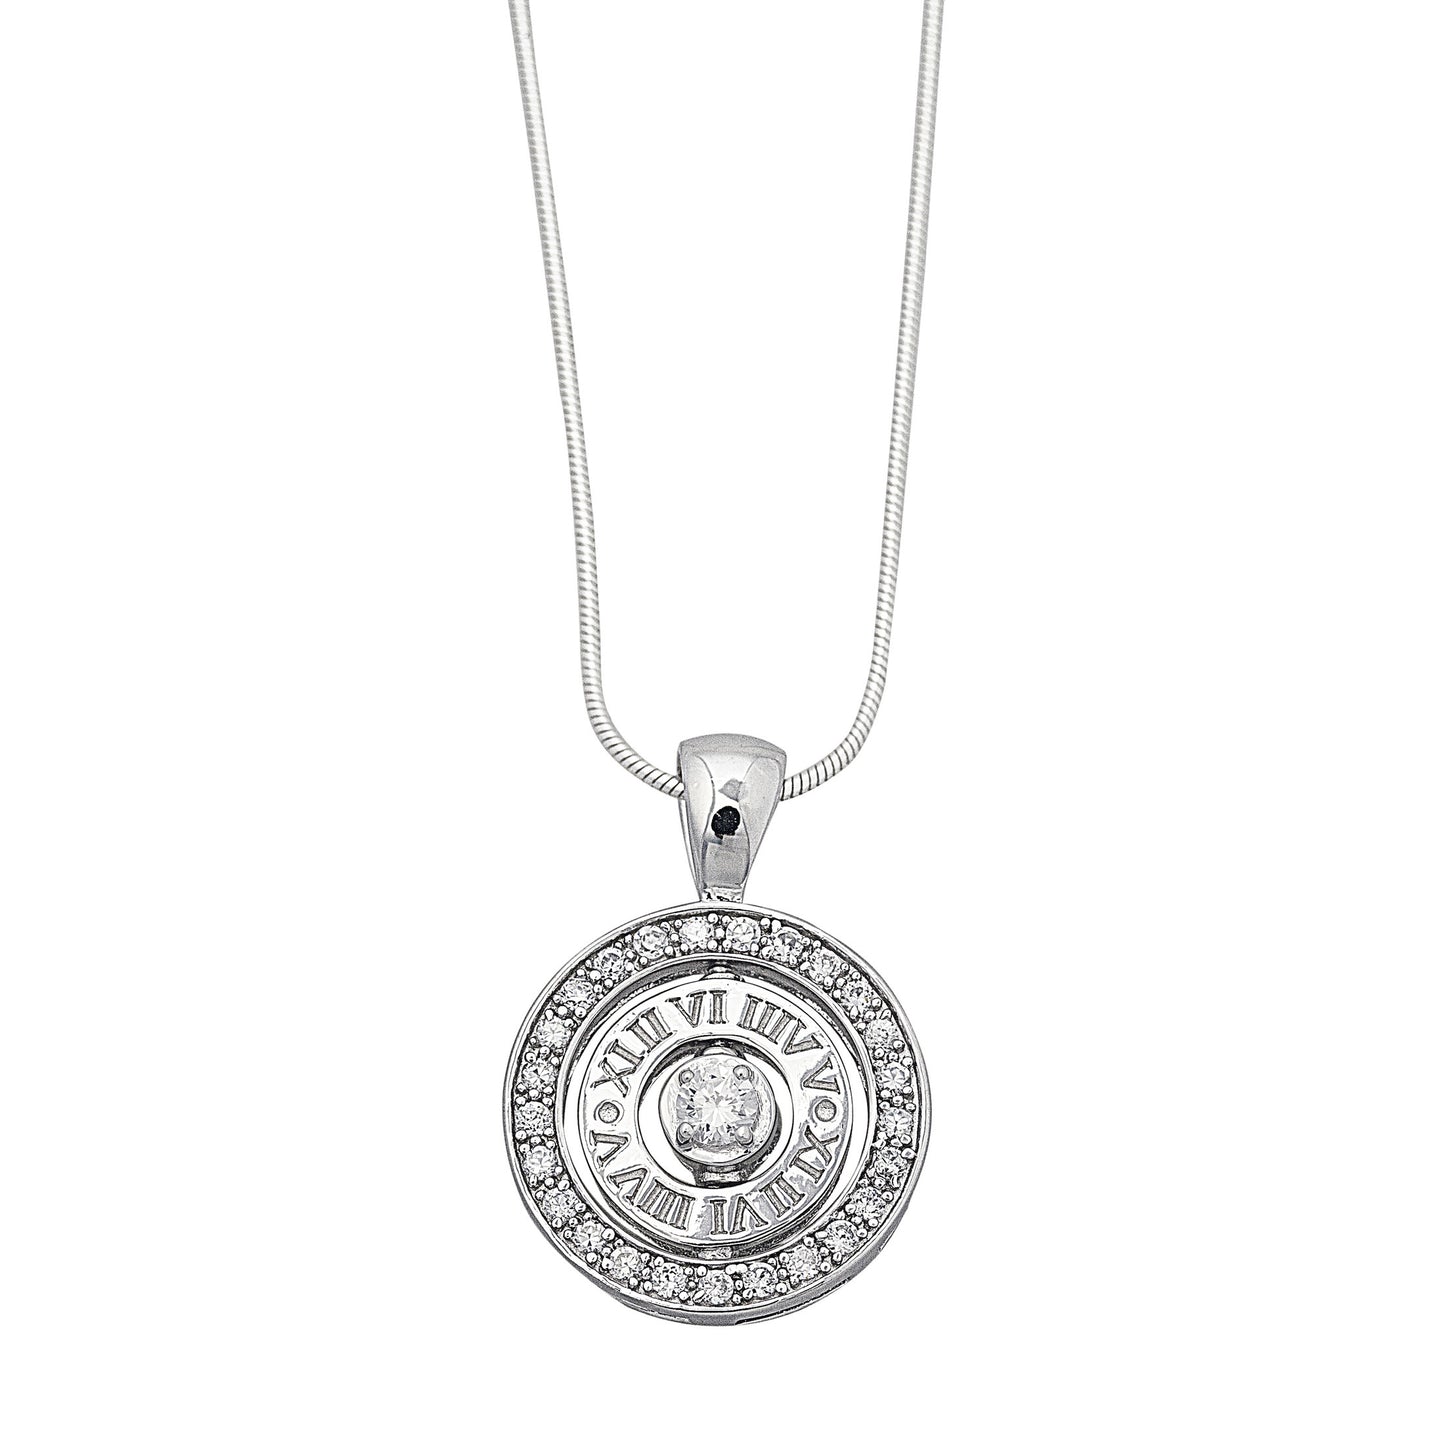 Juicy Lou Necklace features spinning parts that enable to you create several looks. The rings on the pendant contain cubic zirconia stones and our signature Roman numerals. Worldwide shipping. Affordable luxury jewellery by Bellagio & Co.